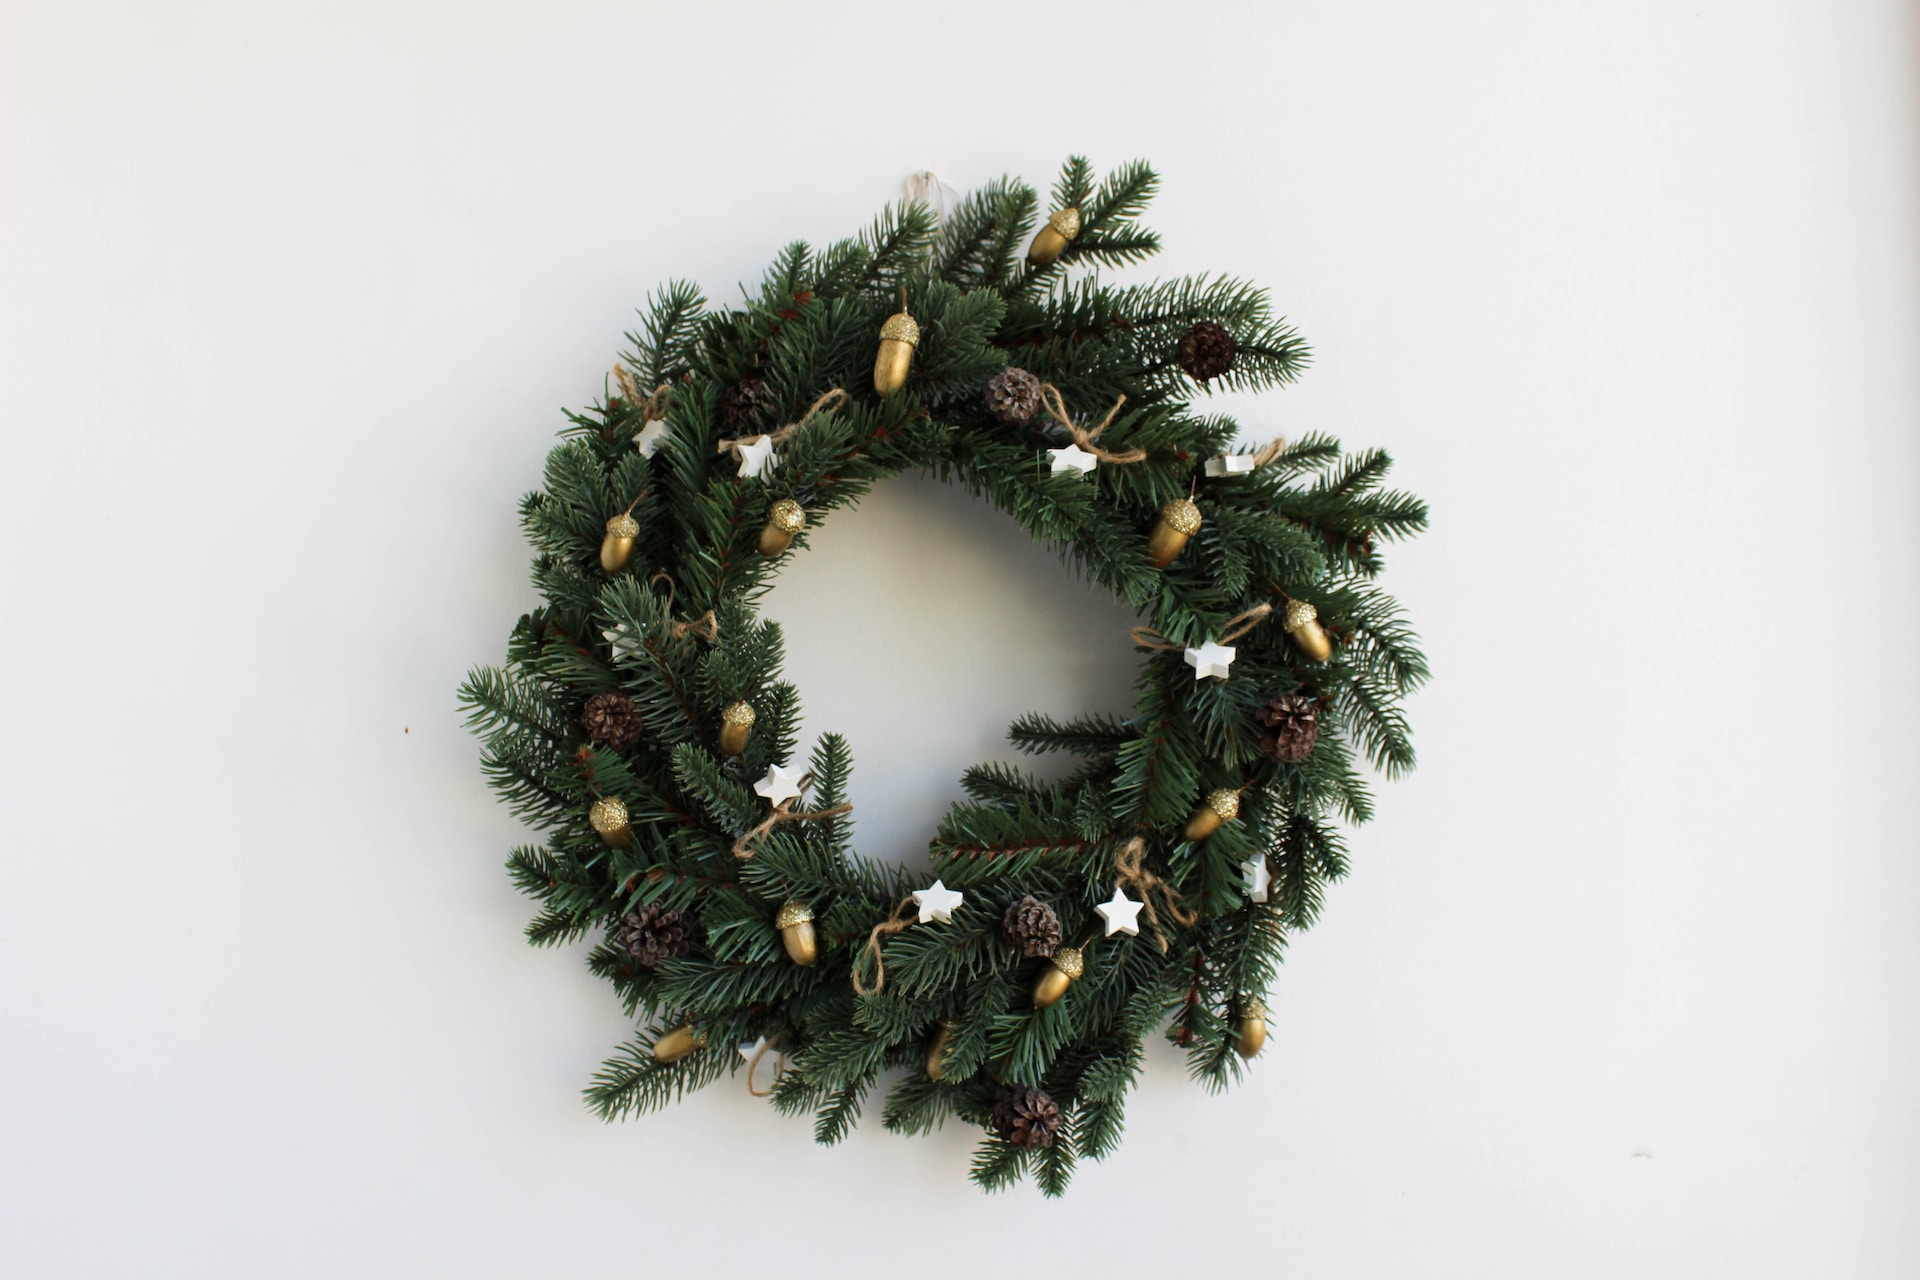 A Christmas wreath symbolizes the change that occurred in the celebrations of Christmas in Armenian communities around the world.